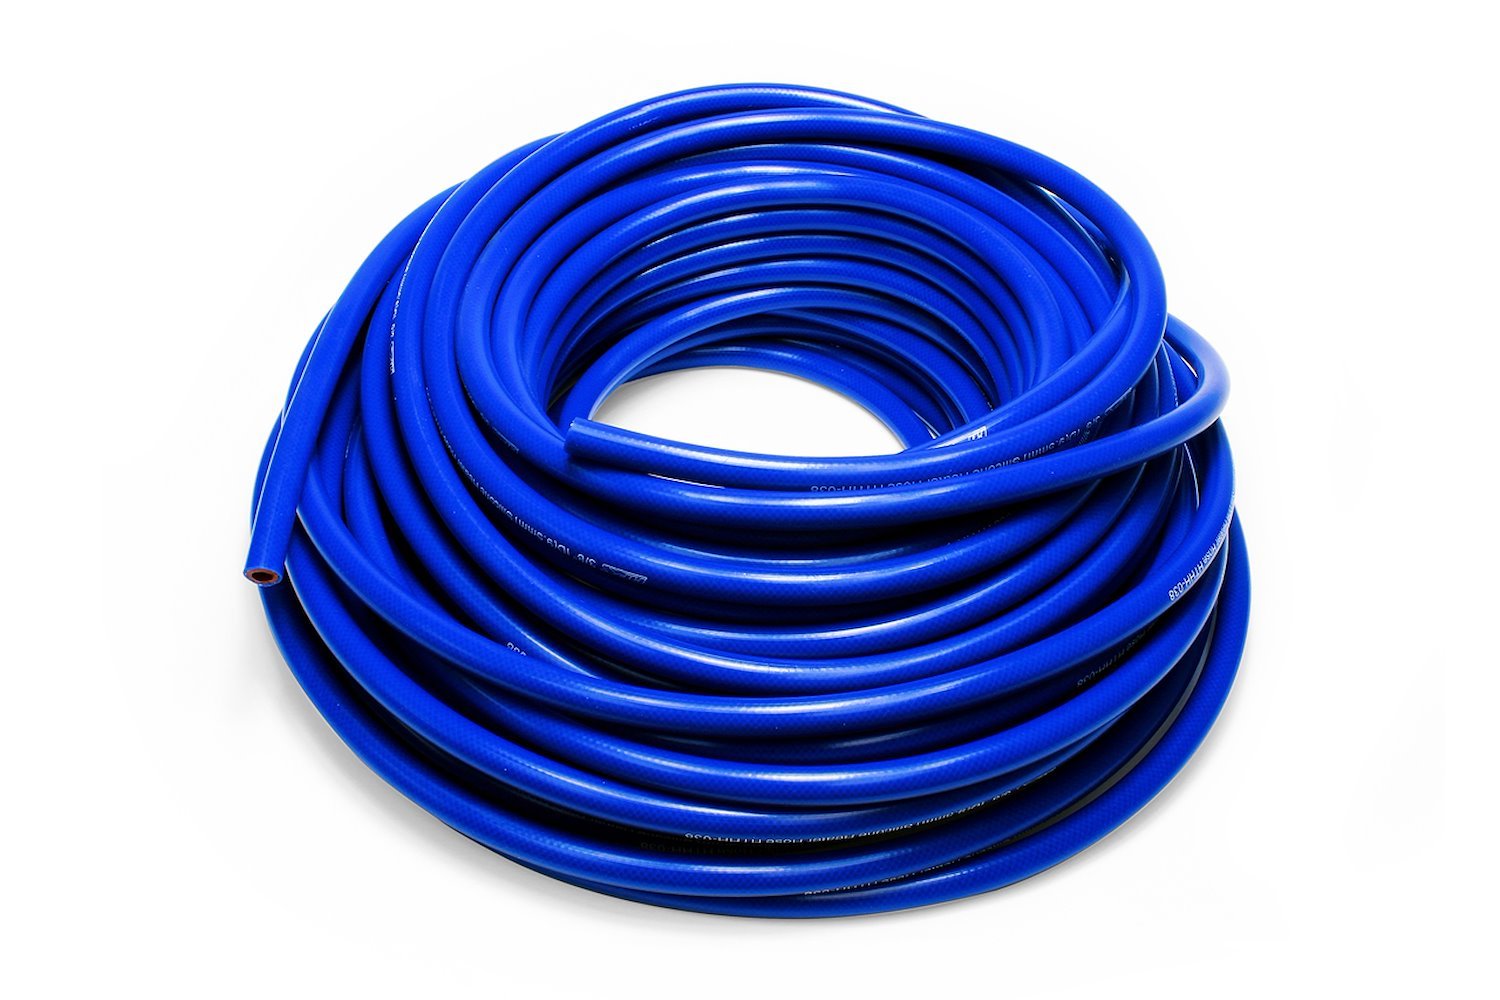 HTHH-016-BLUEx25 Silicone Heater Hose Tubing, High-Temp Reinforced, 5/32 in. ID, 25 ft. Roll, Blue